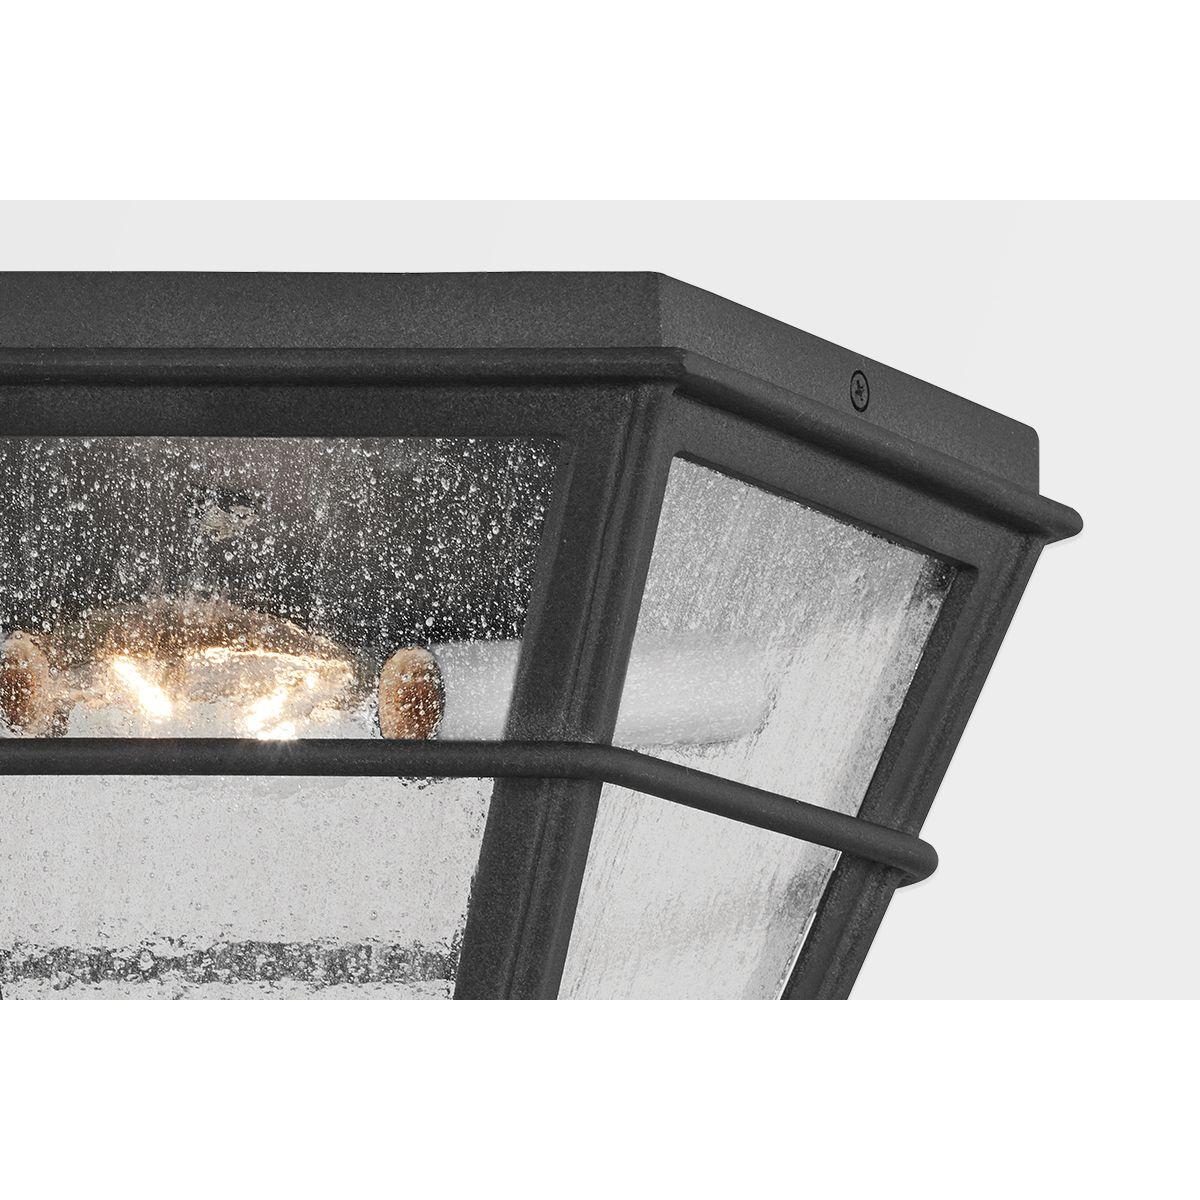 LAKE COUNTY 14 in. 2 lights Outdoor Flush Mount iron finish